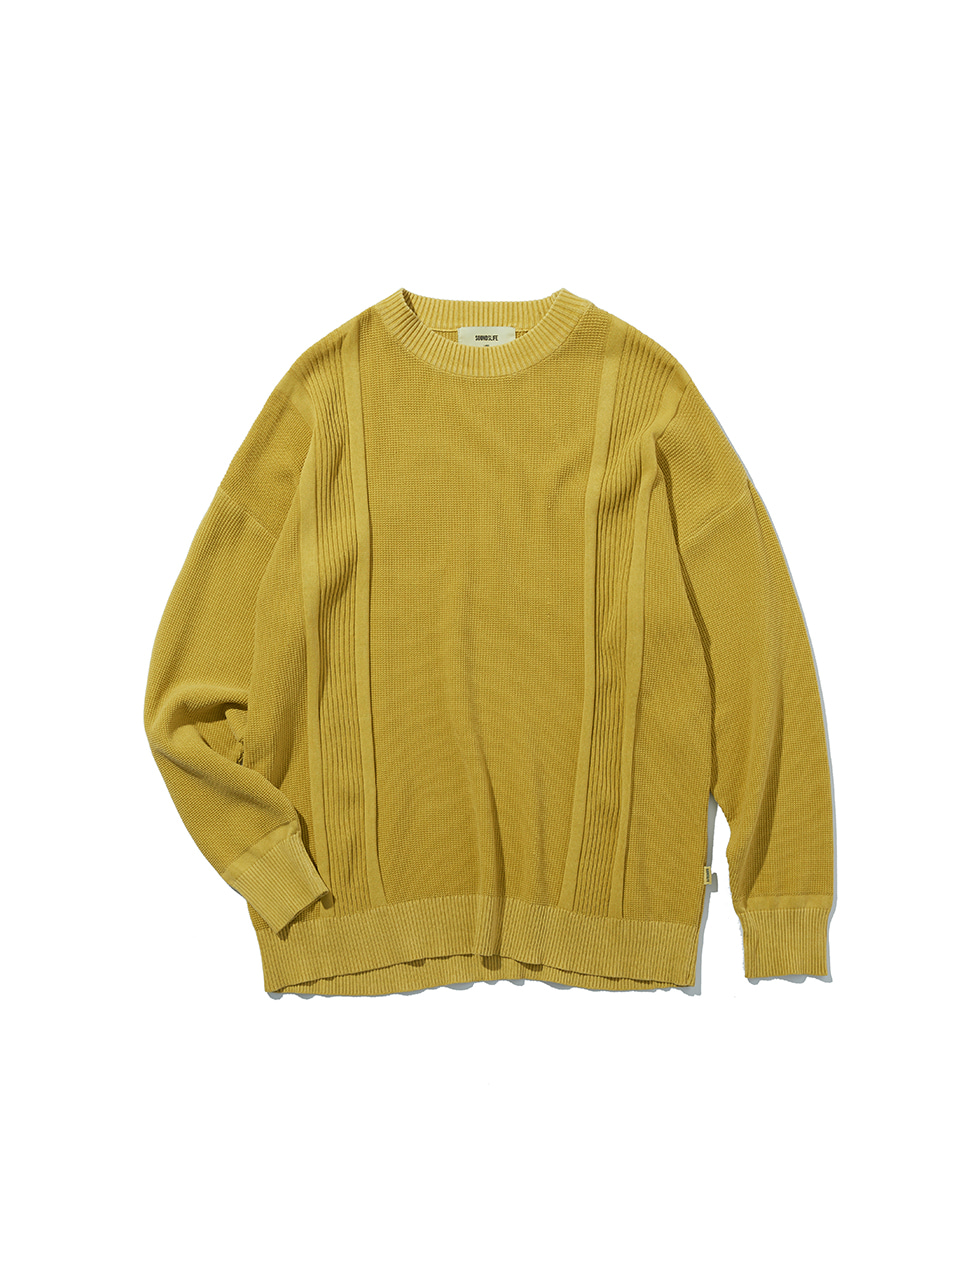 SOUNDSLIFE - Double Faced Pullover Knit Yellow